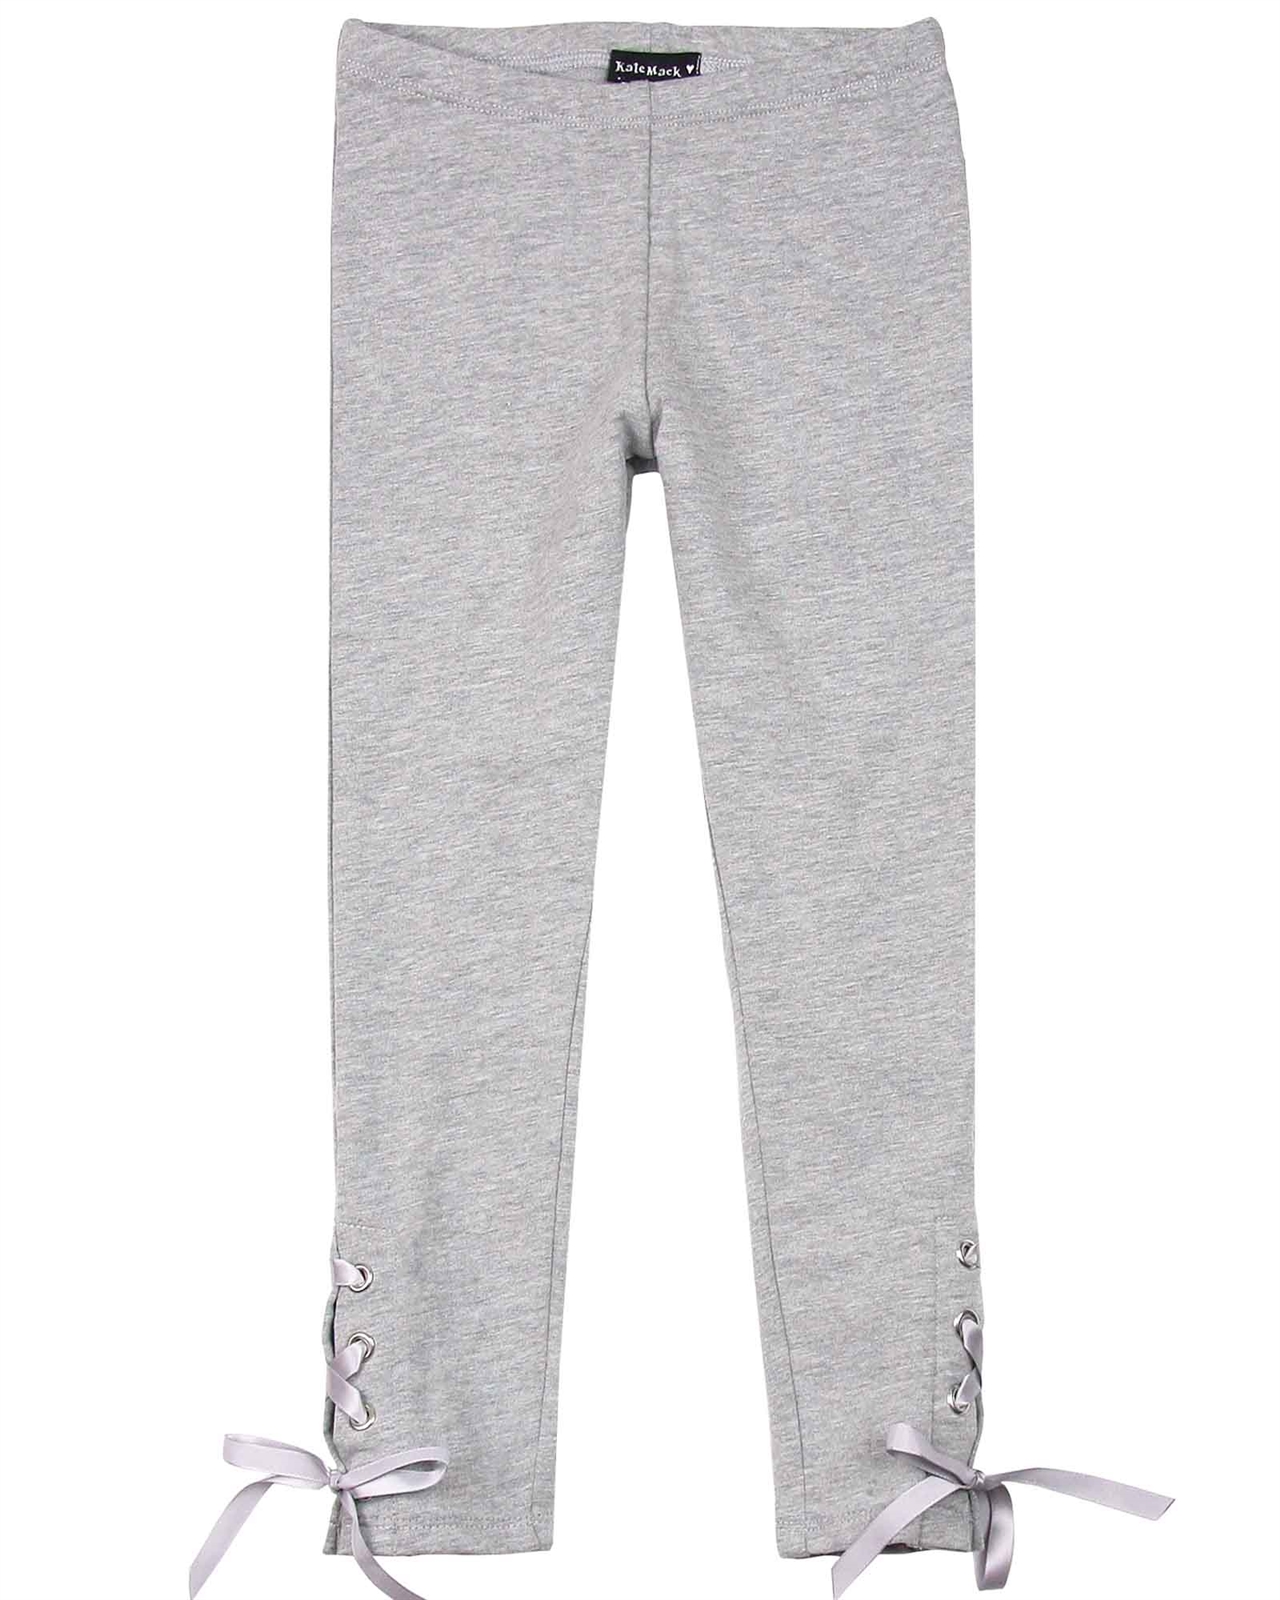 Kate Mack First Position Leggings with Laces in Gray  Biscotti and Kate  Mack Children's Clothing Fall Winter 2019